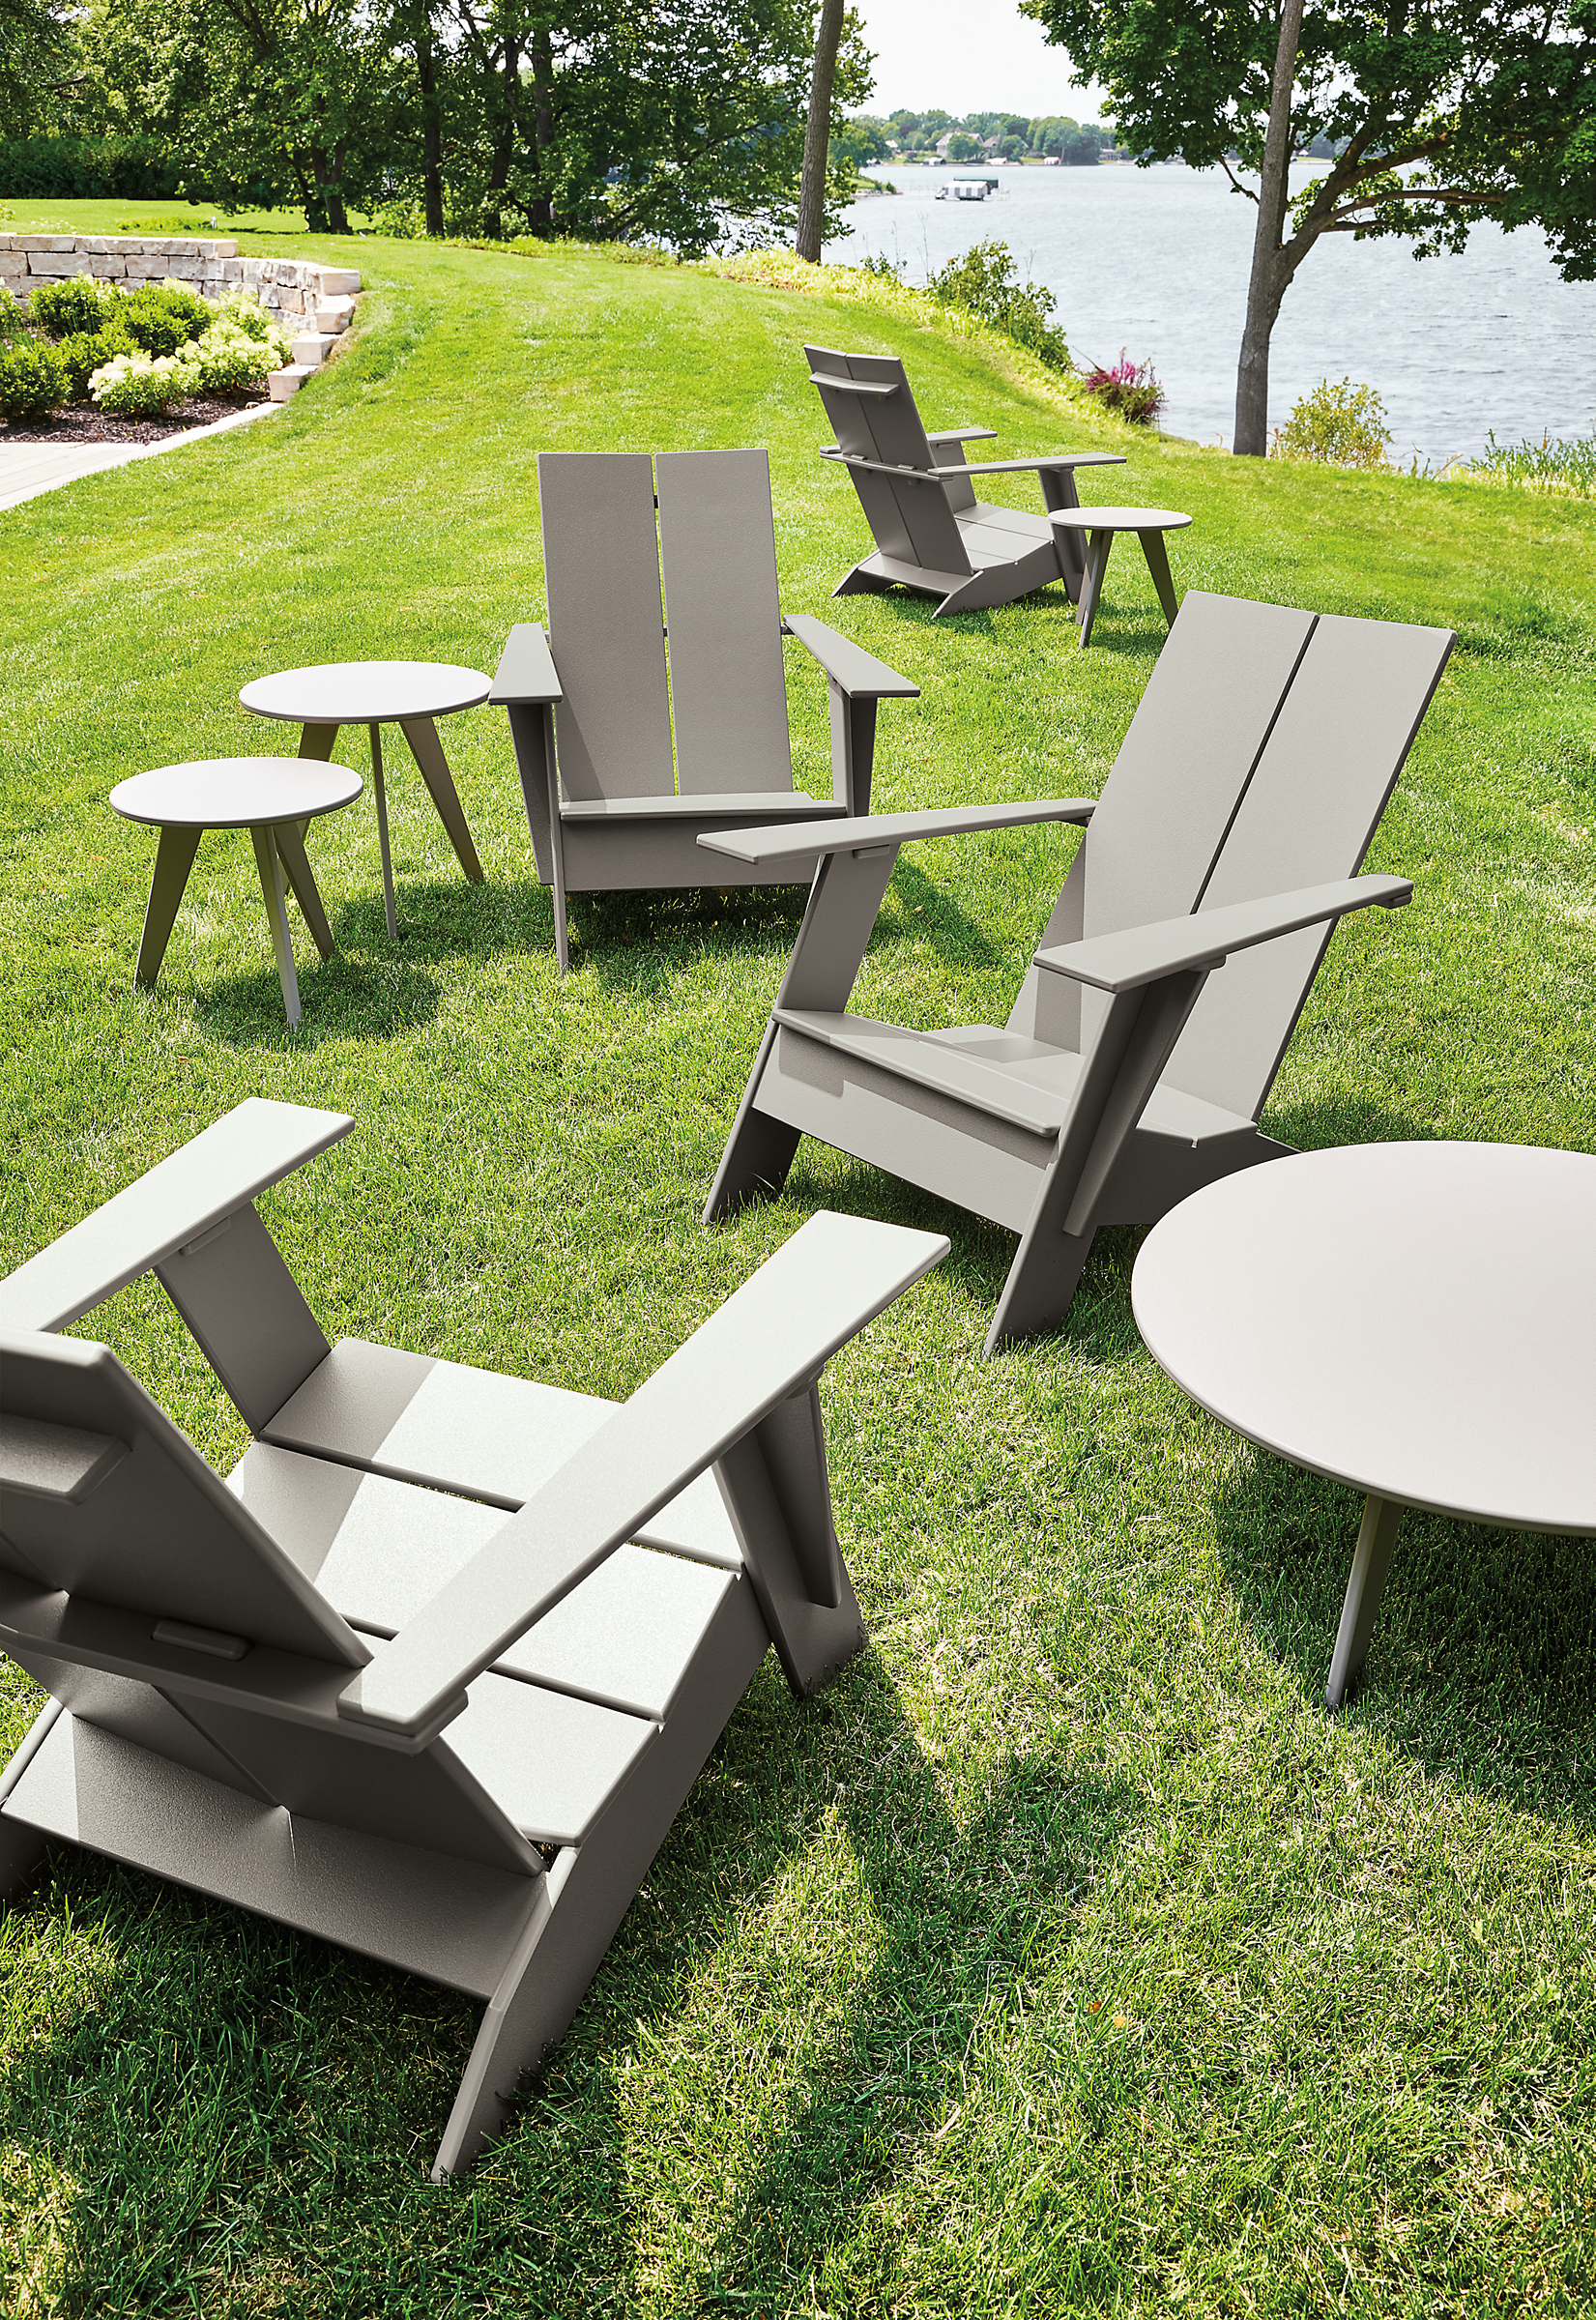 lawn with several emmet chairs and nova tables in putty.